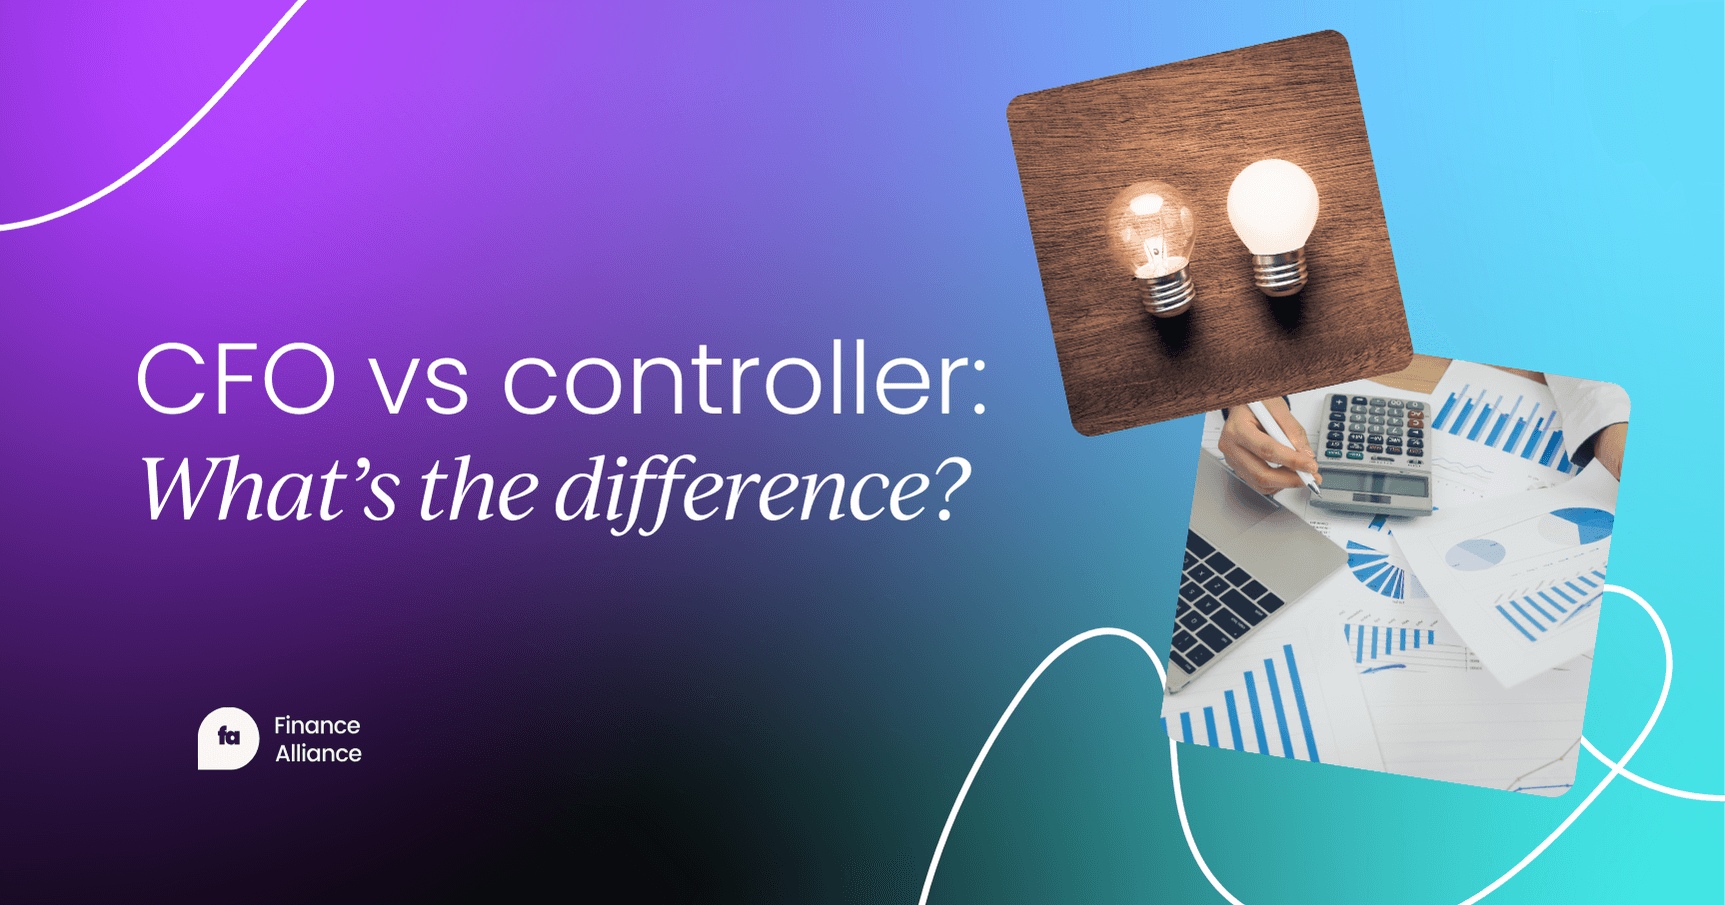 CFO vs. Controller: What’s the difference?